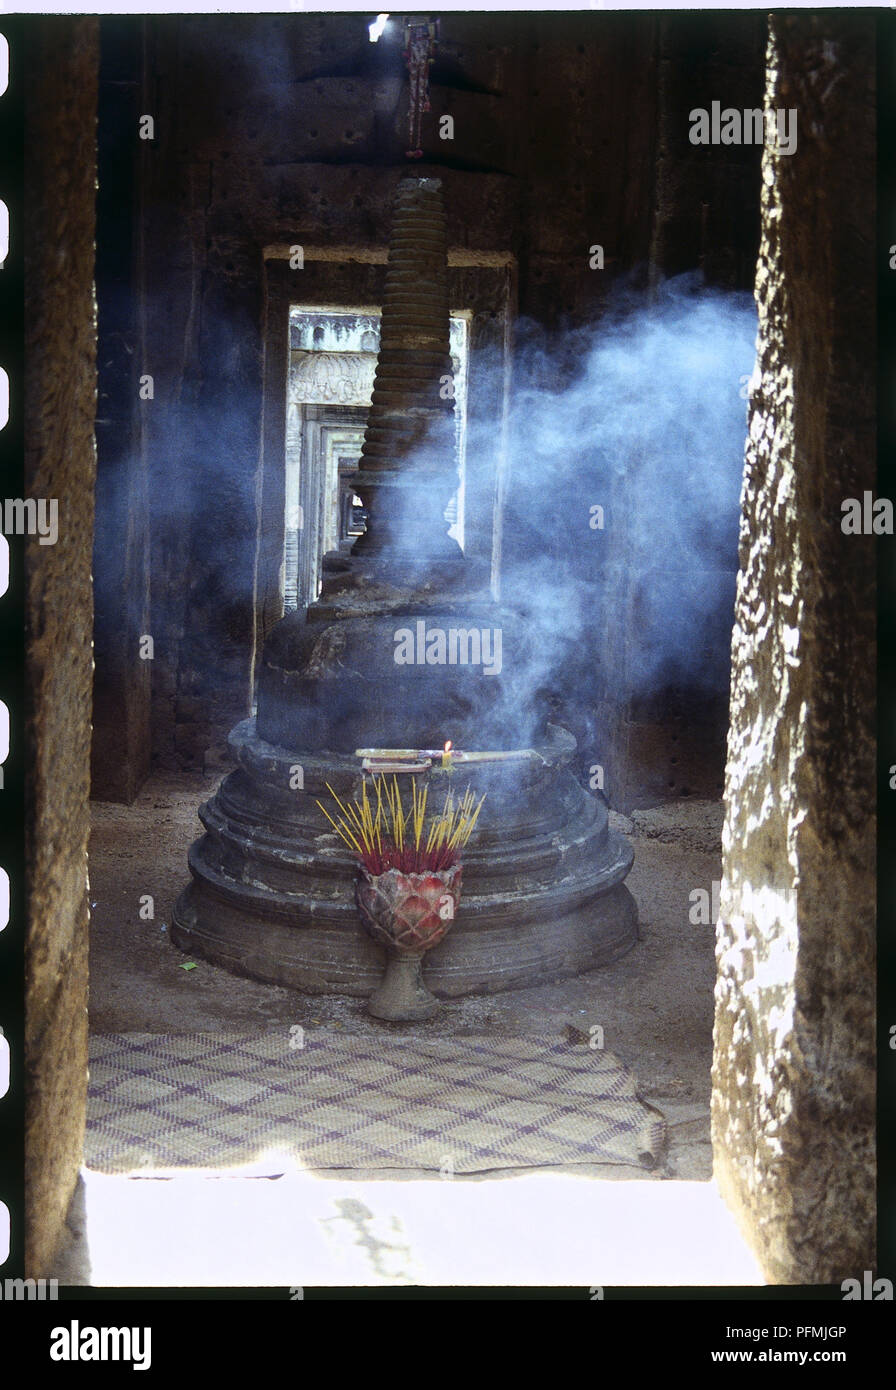 Sunlight streaming through a window of a room filled with smoke from an incense burner in Buddhist Monastery Stock Photo